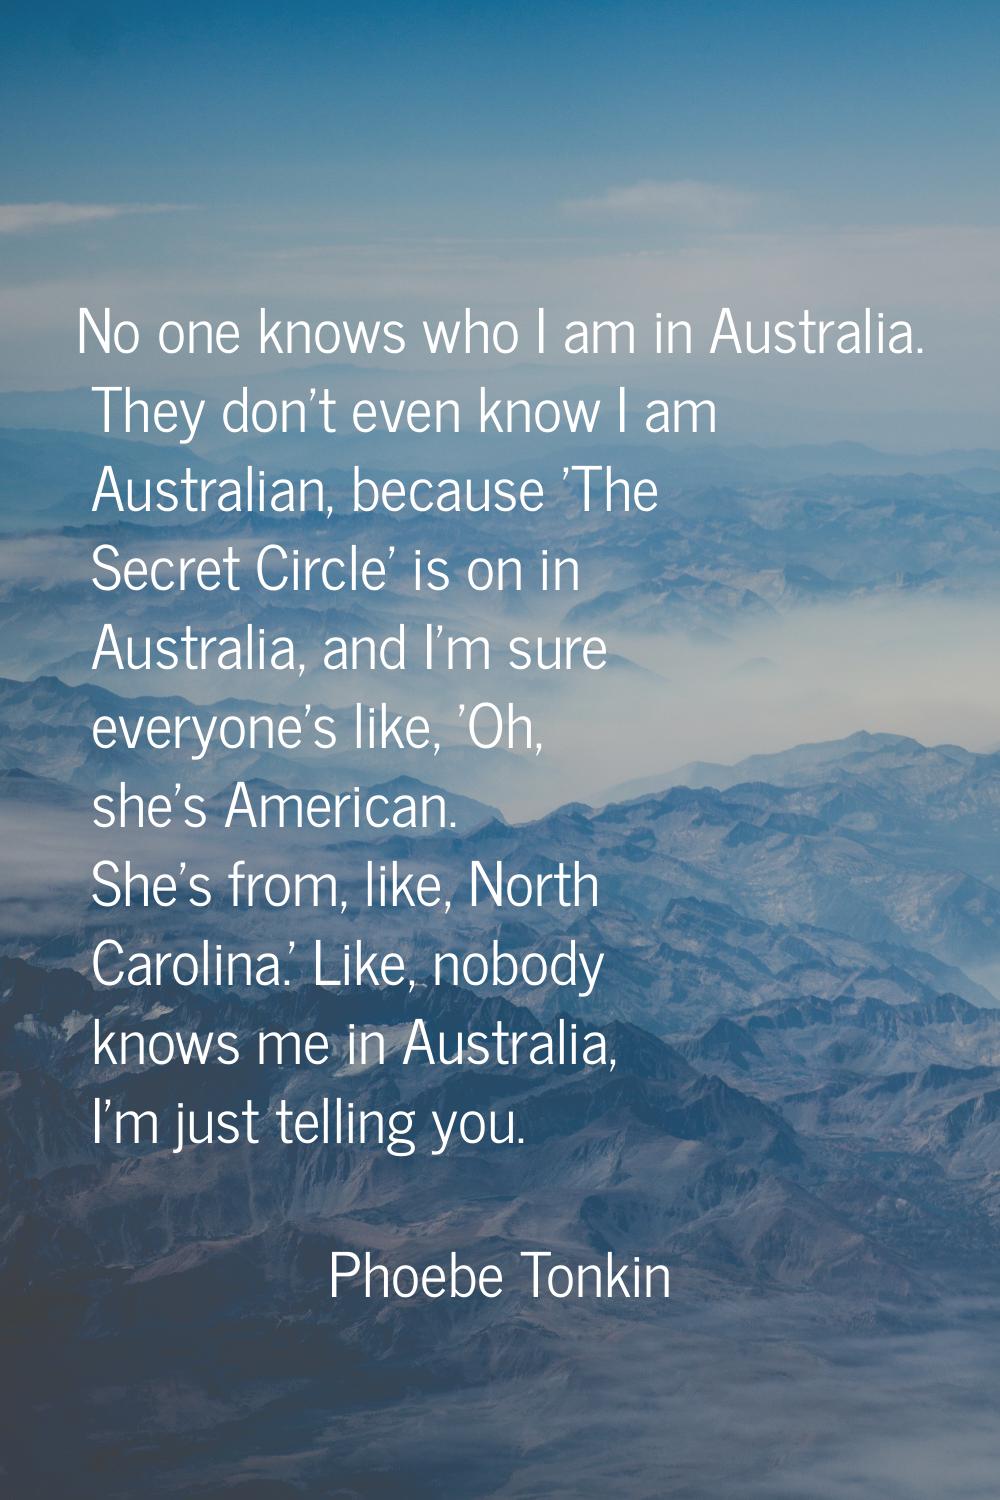 No one knows who I am in Australia. They don't even know I am Australian, because 'The Secret Circl